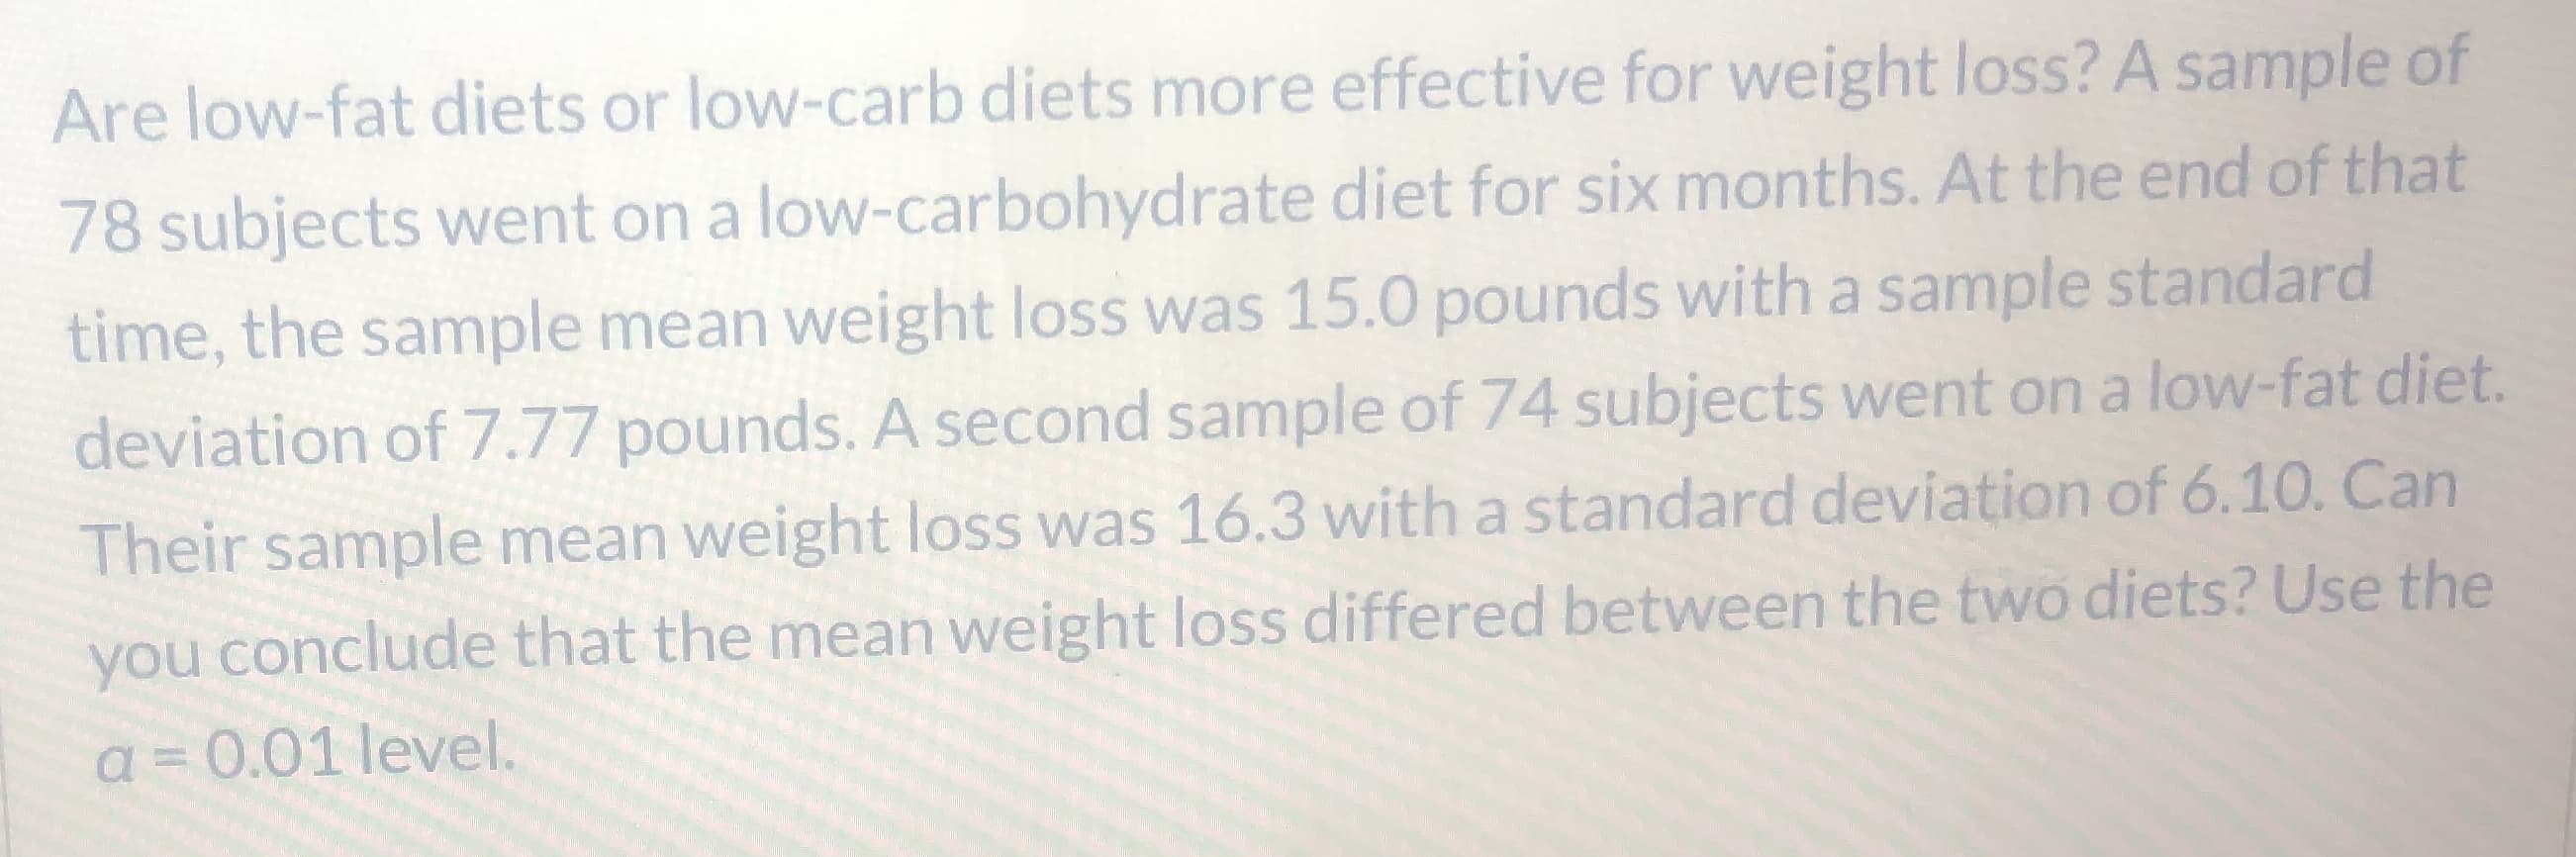 Are low-fat diets or low-carb diets more effective for weight loss? A sample of
78 subjects went on a low-carbohydrate diet for six months. At the end of that
time, the sample mean weight loss was 15.0 pounds with a sample standard
deviation of 7.77 pounds. A second sample of 74 subjects went on a low-fat diet.
Their sample mean weight loss was 16.3 with a standard deviation of 6.10. Can
you conclude that the mean weight loss differed between the two diets? Use the
a = 0.01 level.
